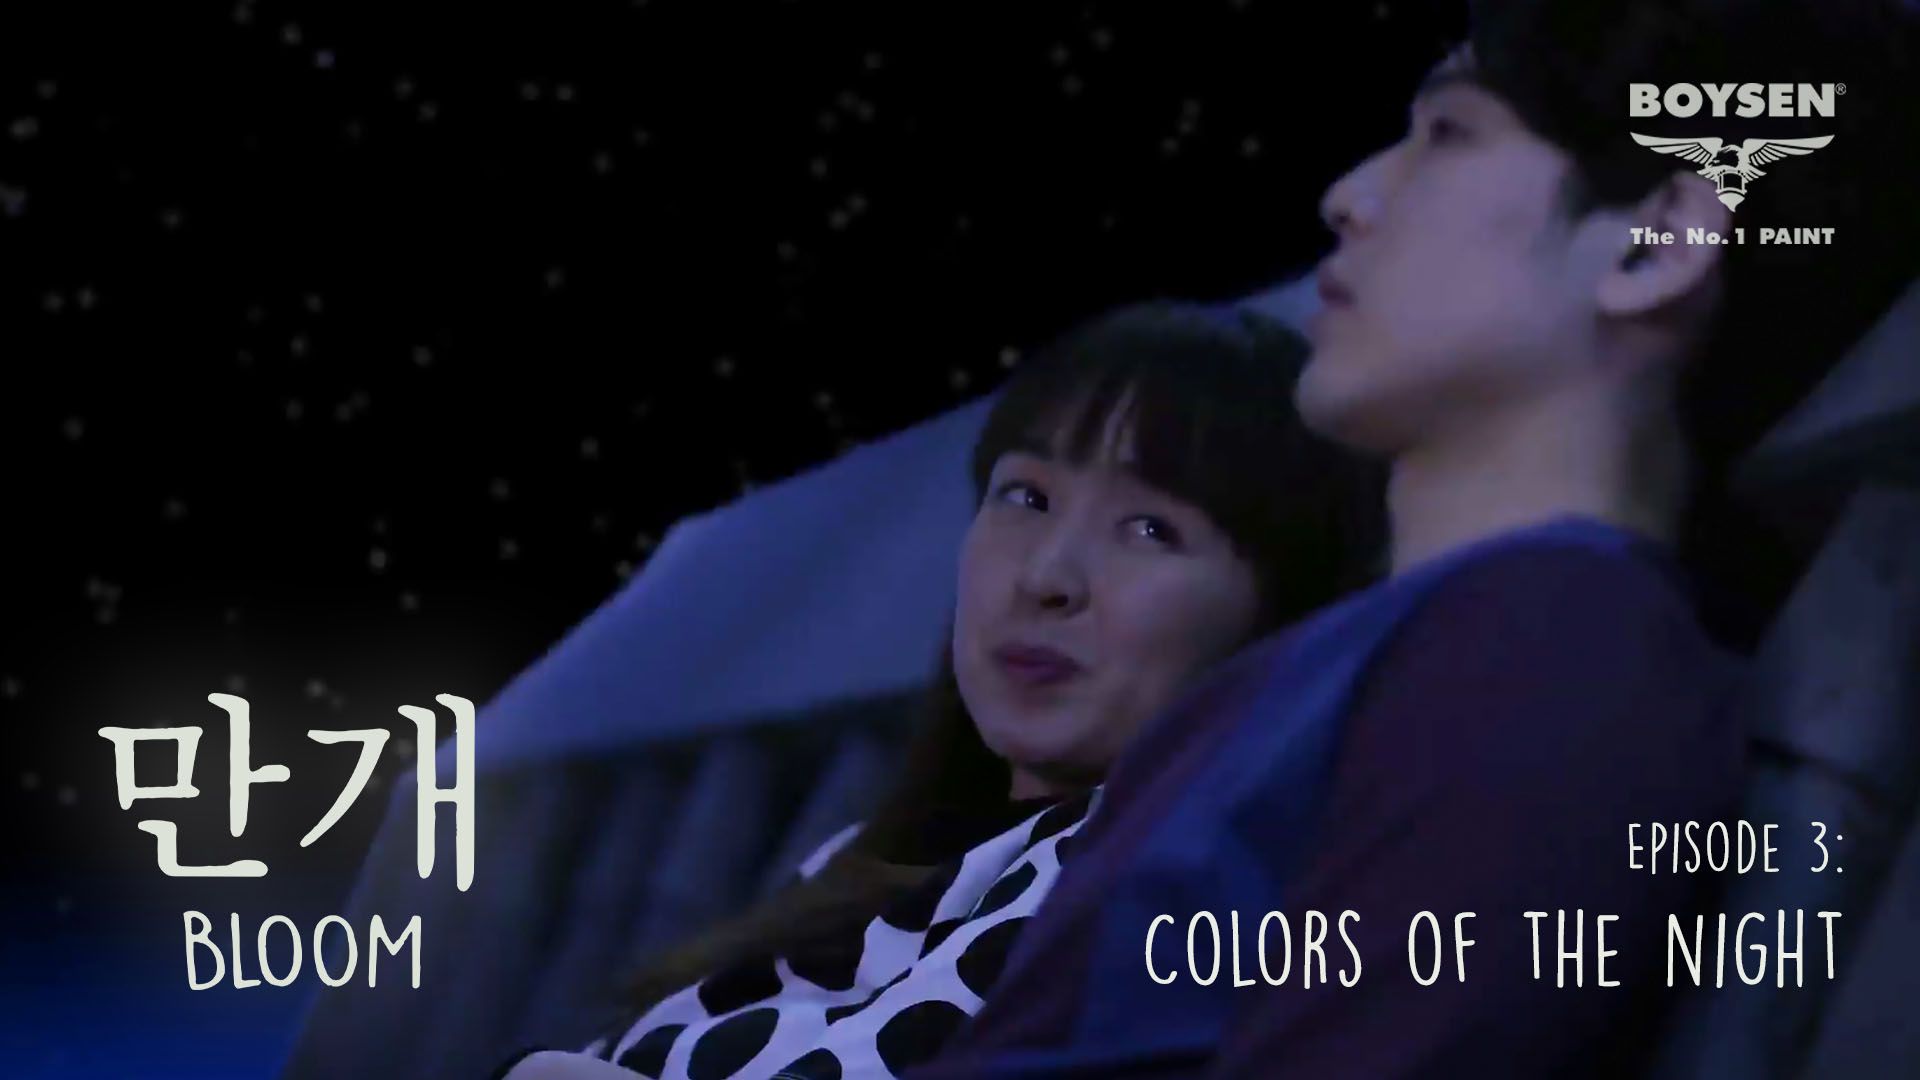 Episode 3 “Colors Of The Night”